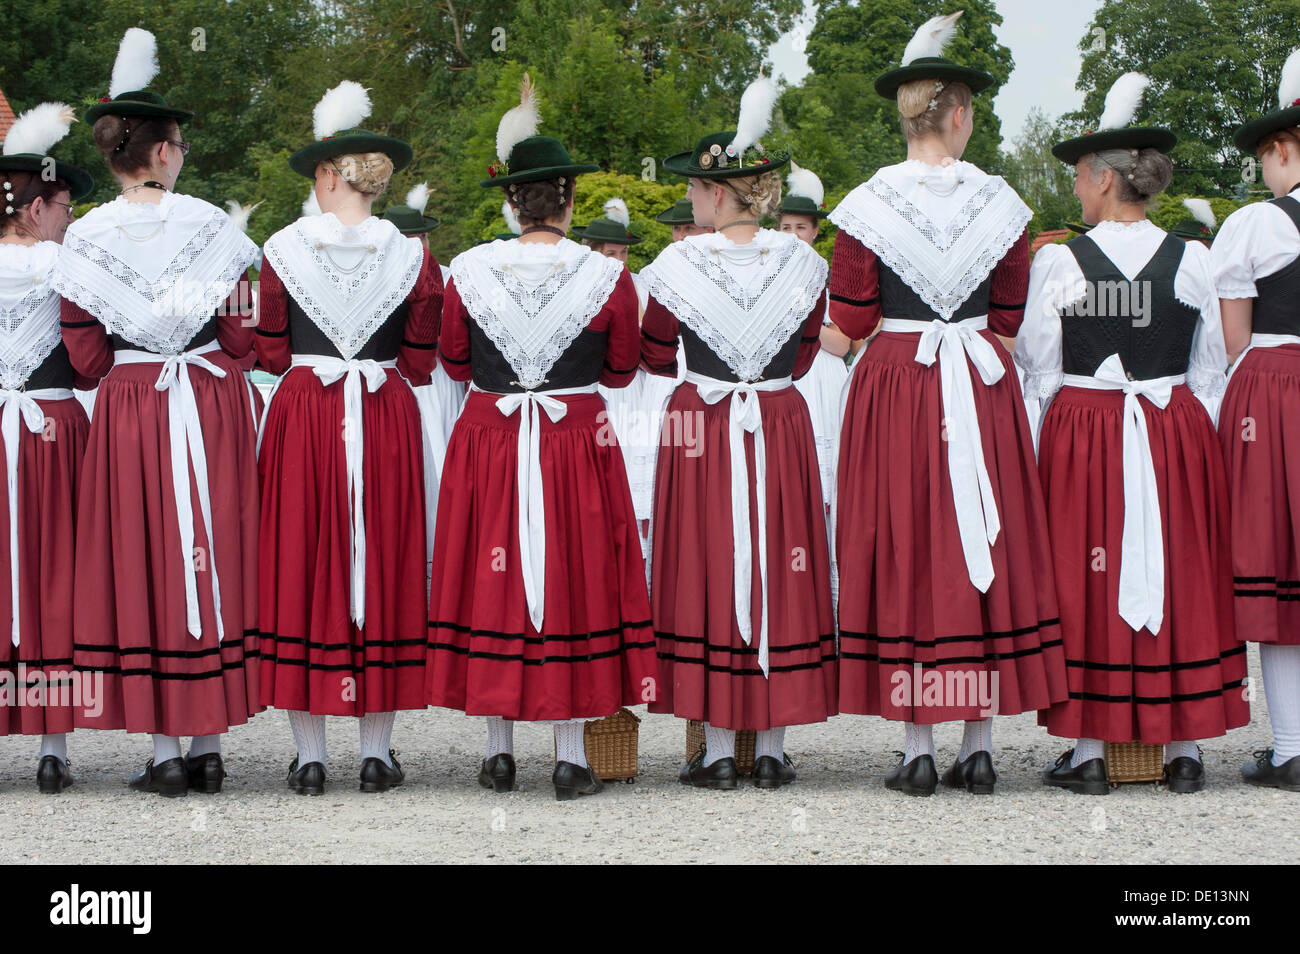 Women in traditional Bavarian costume forming a guard of honour for the entrance into the beer tent, 90th anniversary of the Stock Photo